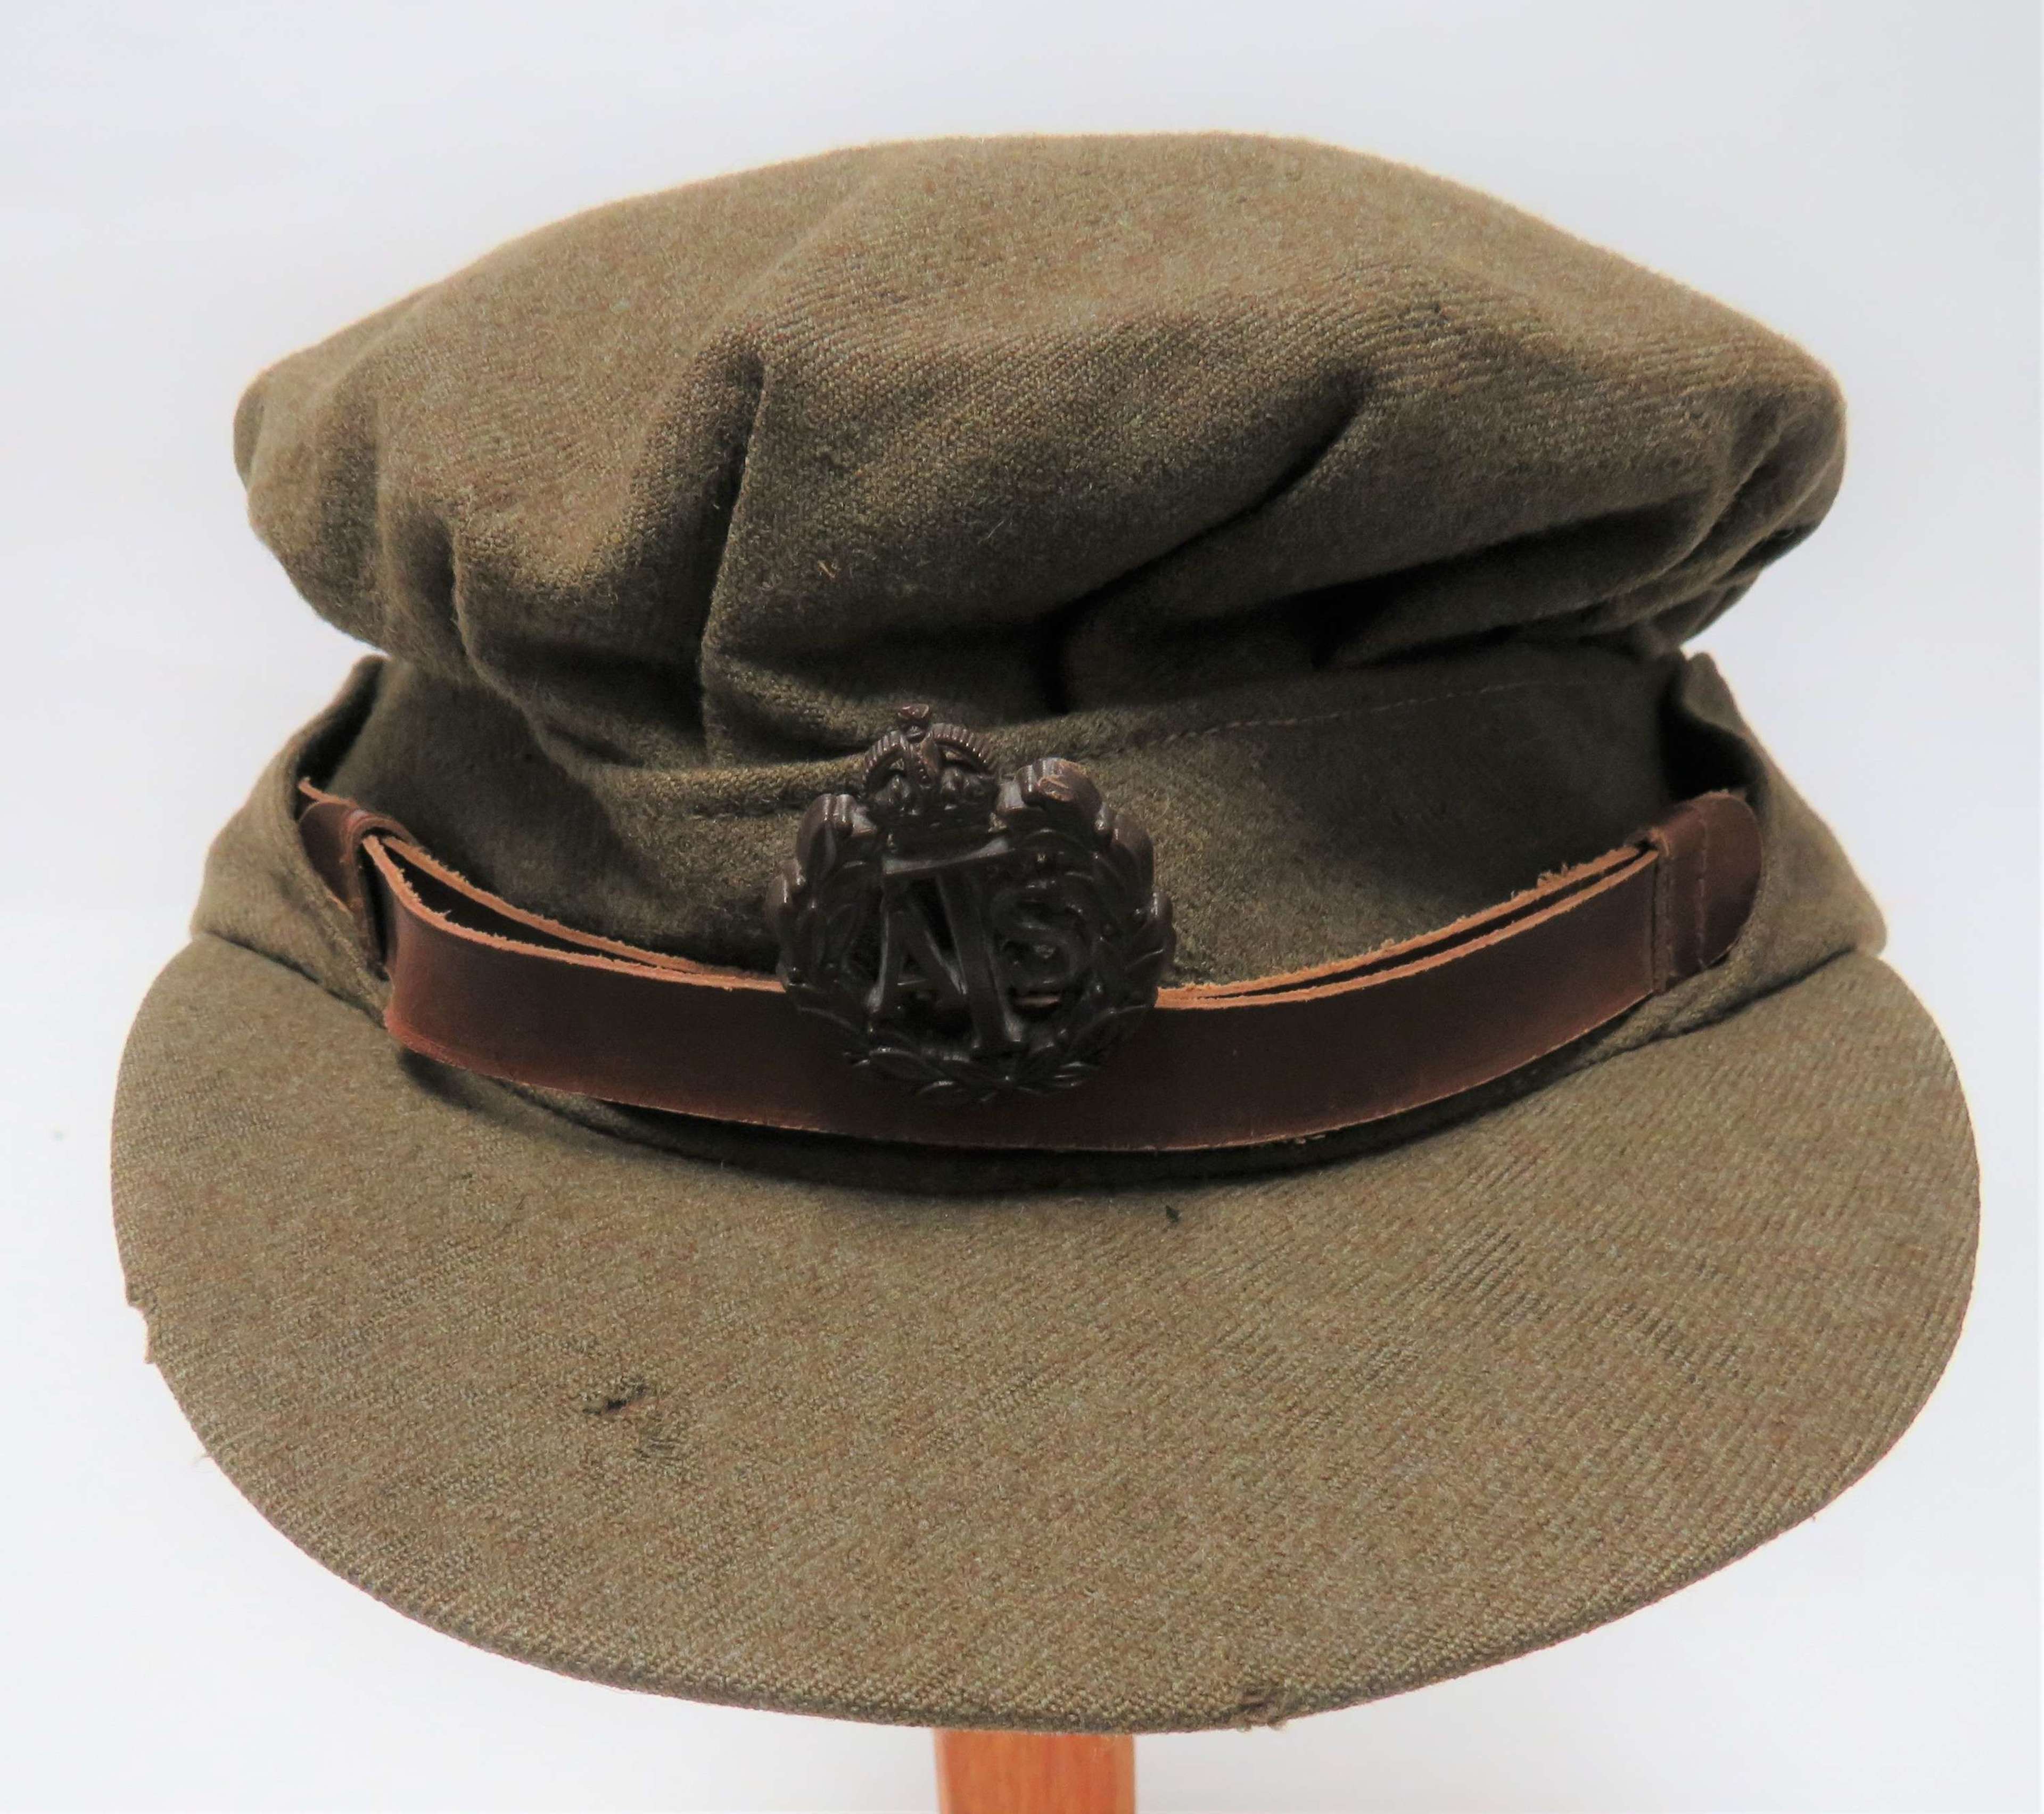 WW2 A.T.S Issue Other Ranks Service Dress Cap